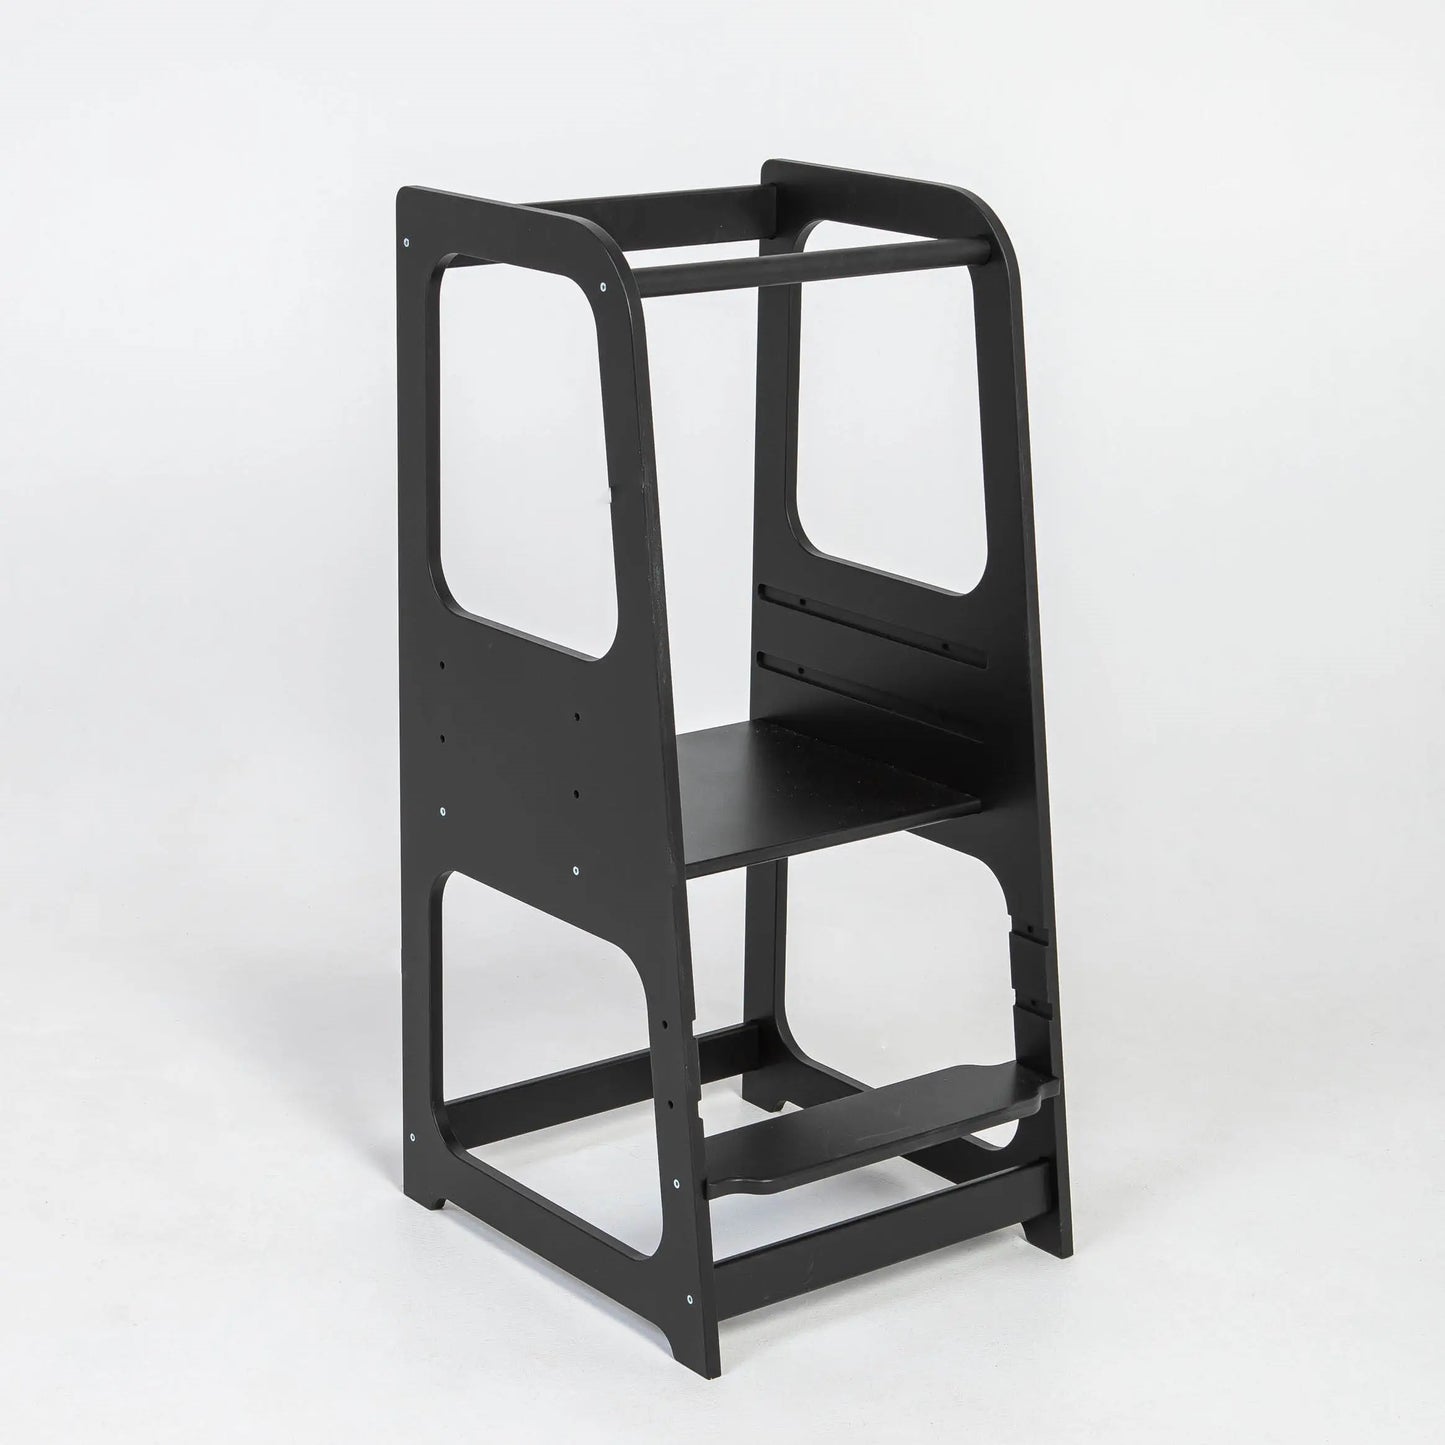 A black chair with a shelf, ideal for young learners and chefs, the Montessori Learning Tower Step Stool for Kids promotes independence and safe exploration in the kitchen.